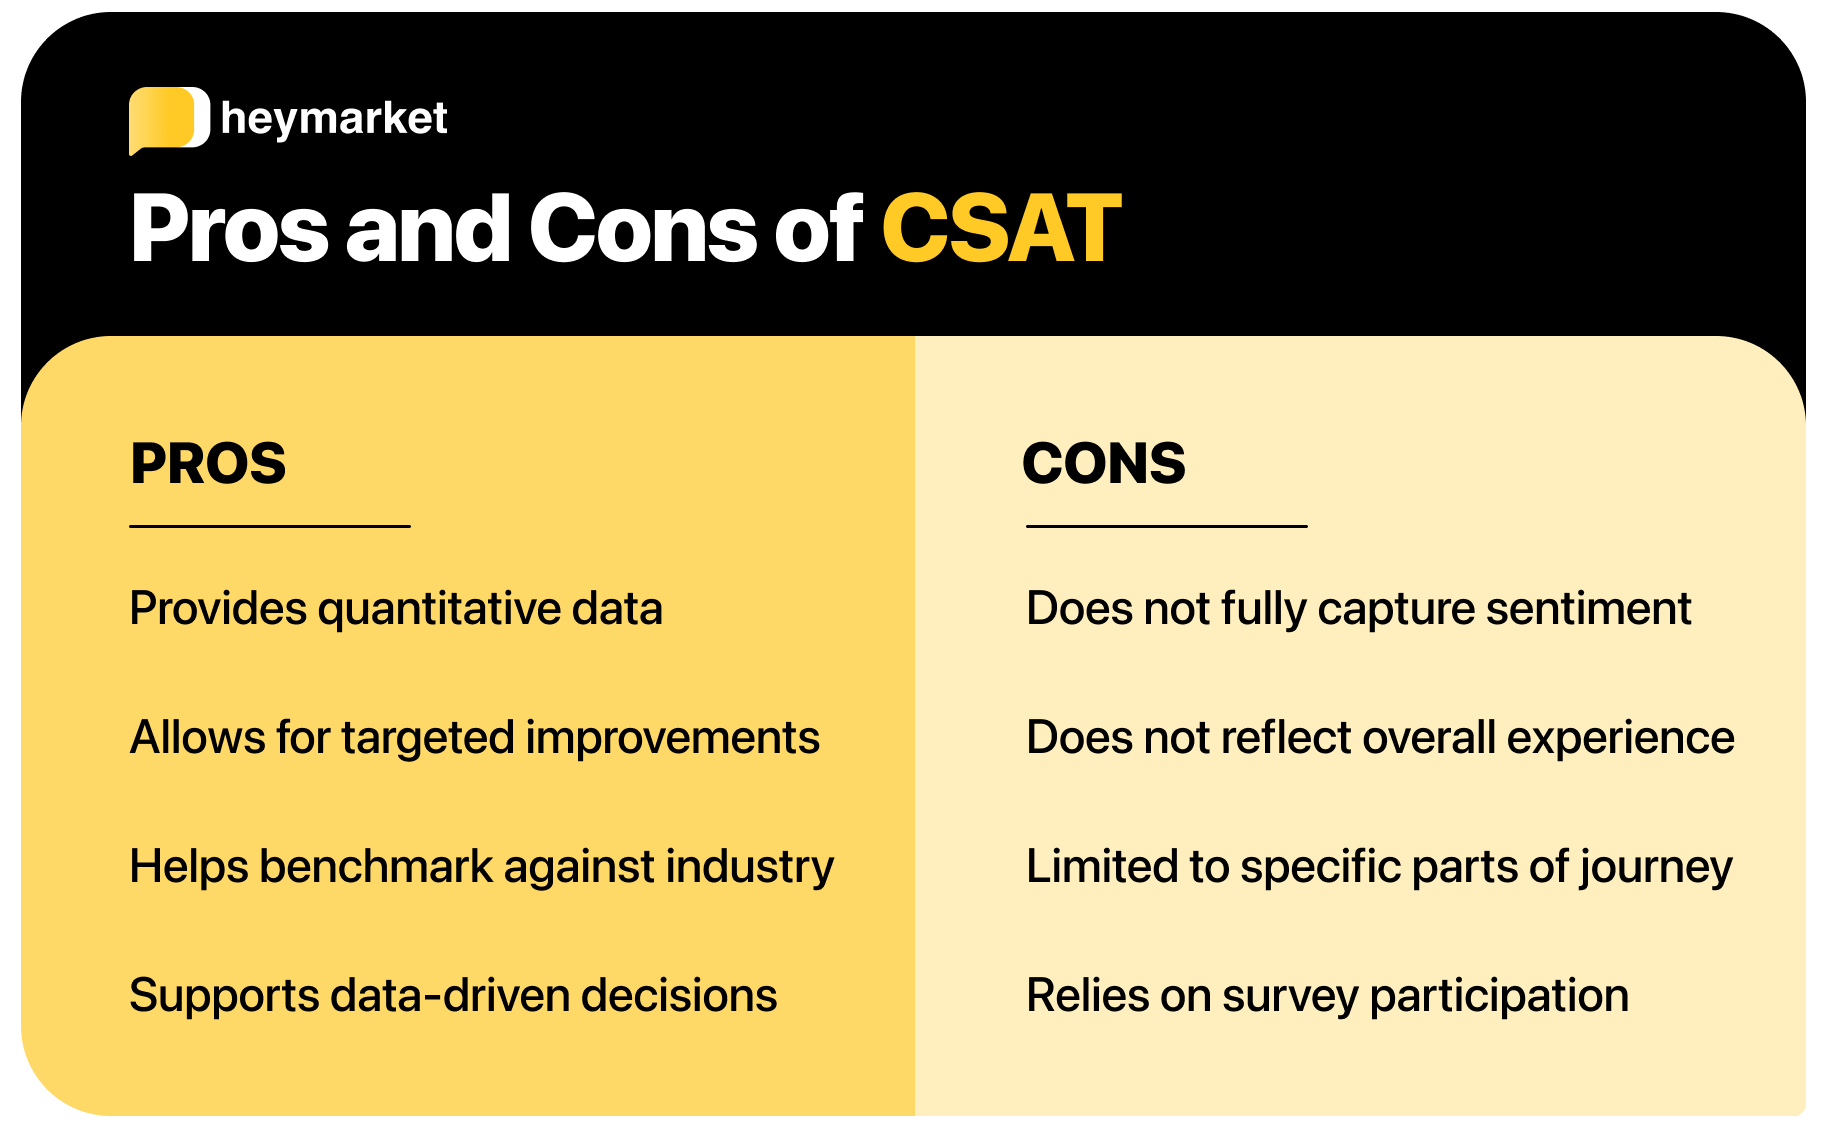 Diagram showing the pros and cons of CSAT scores